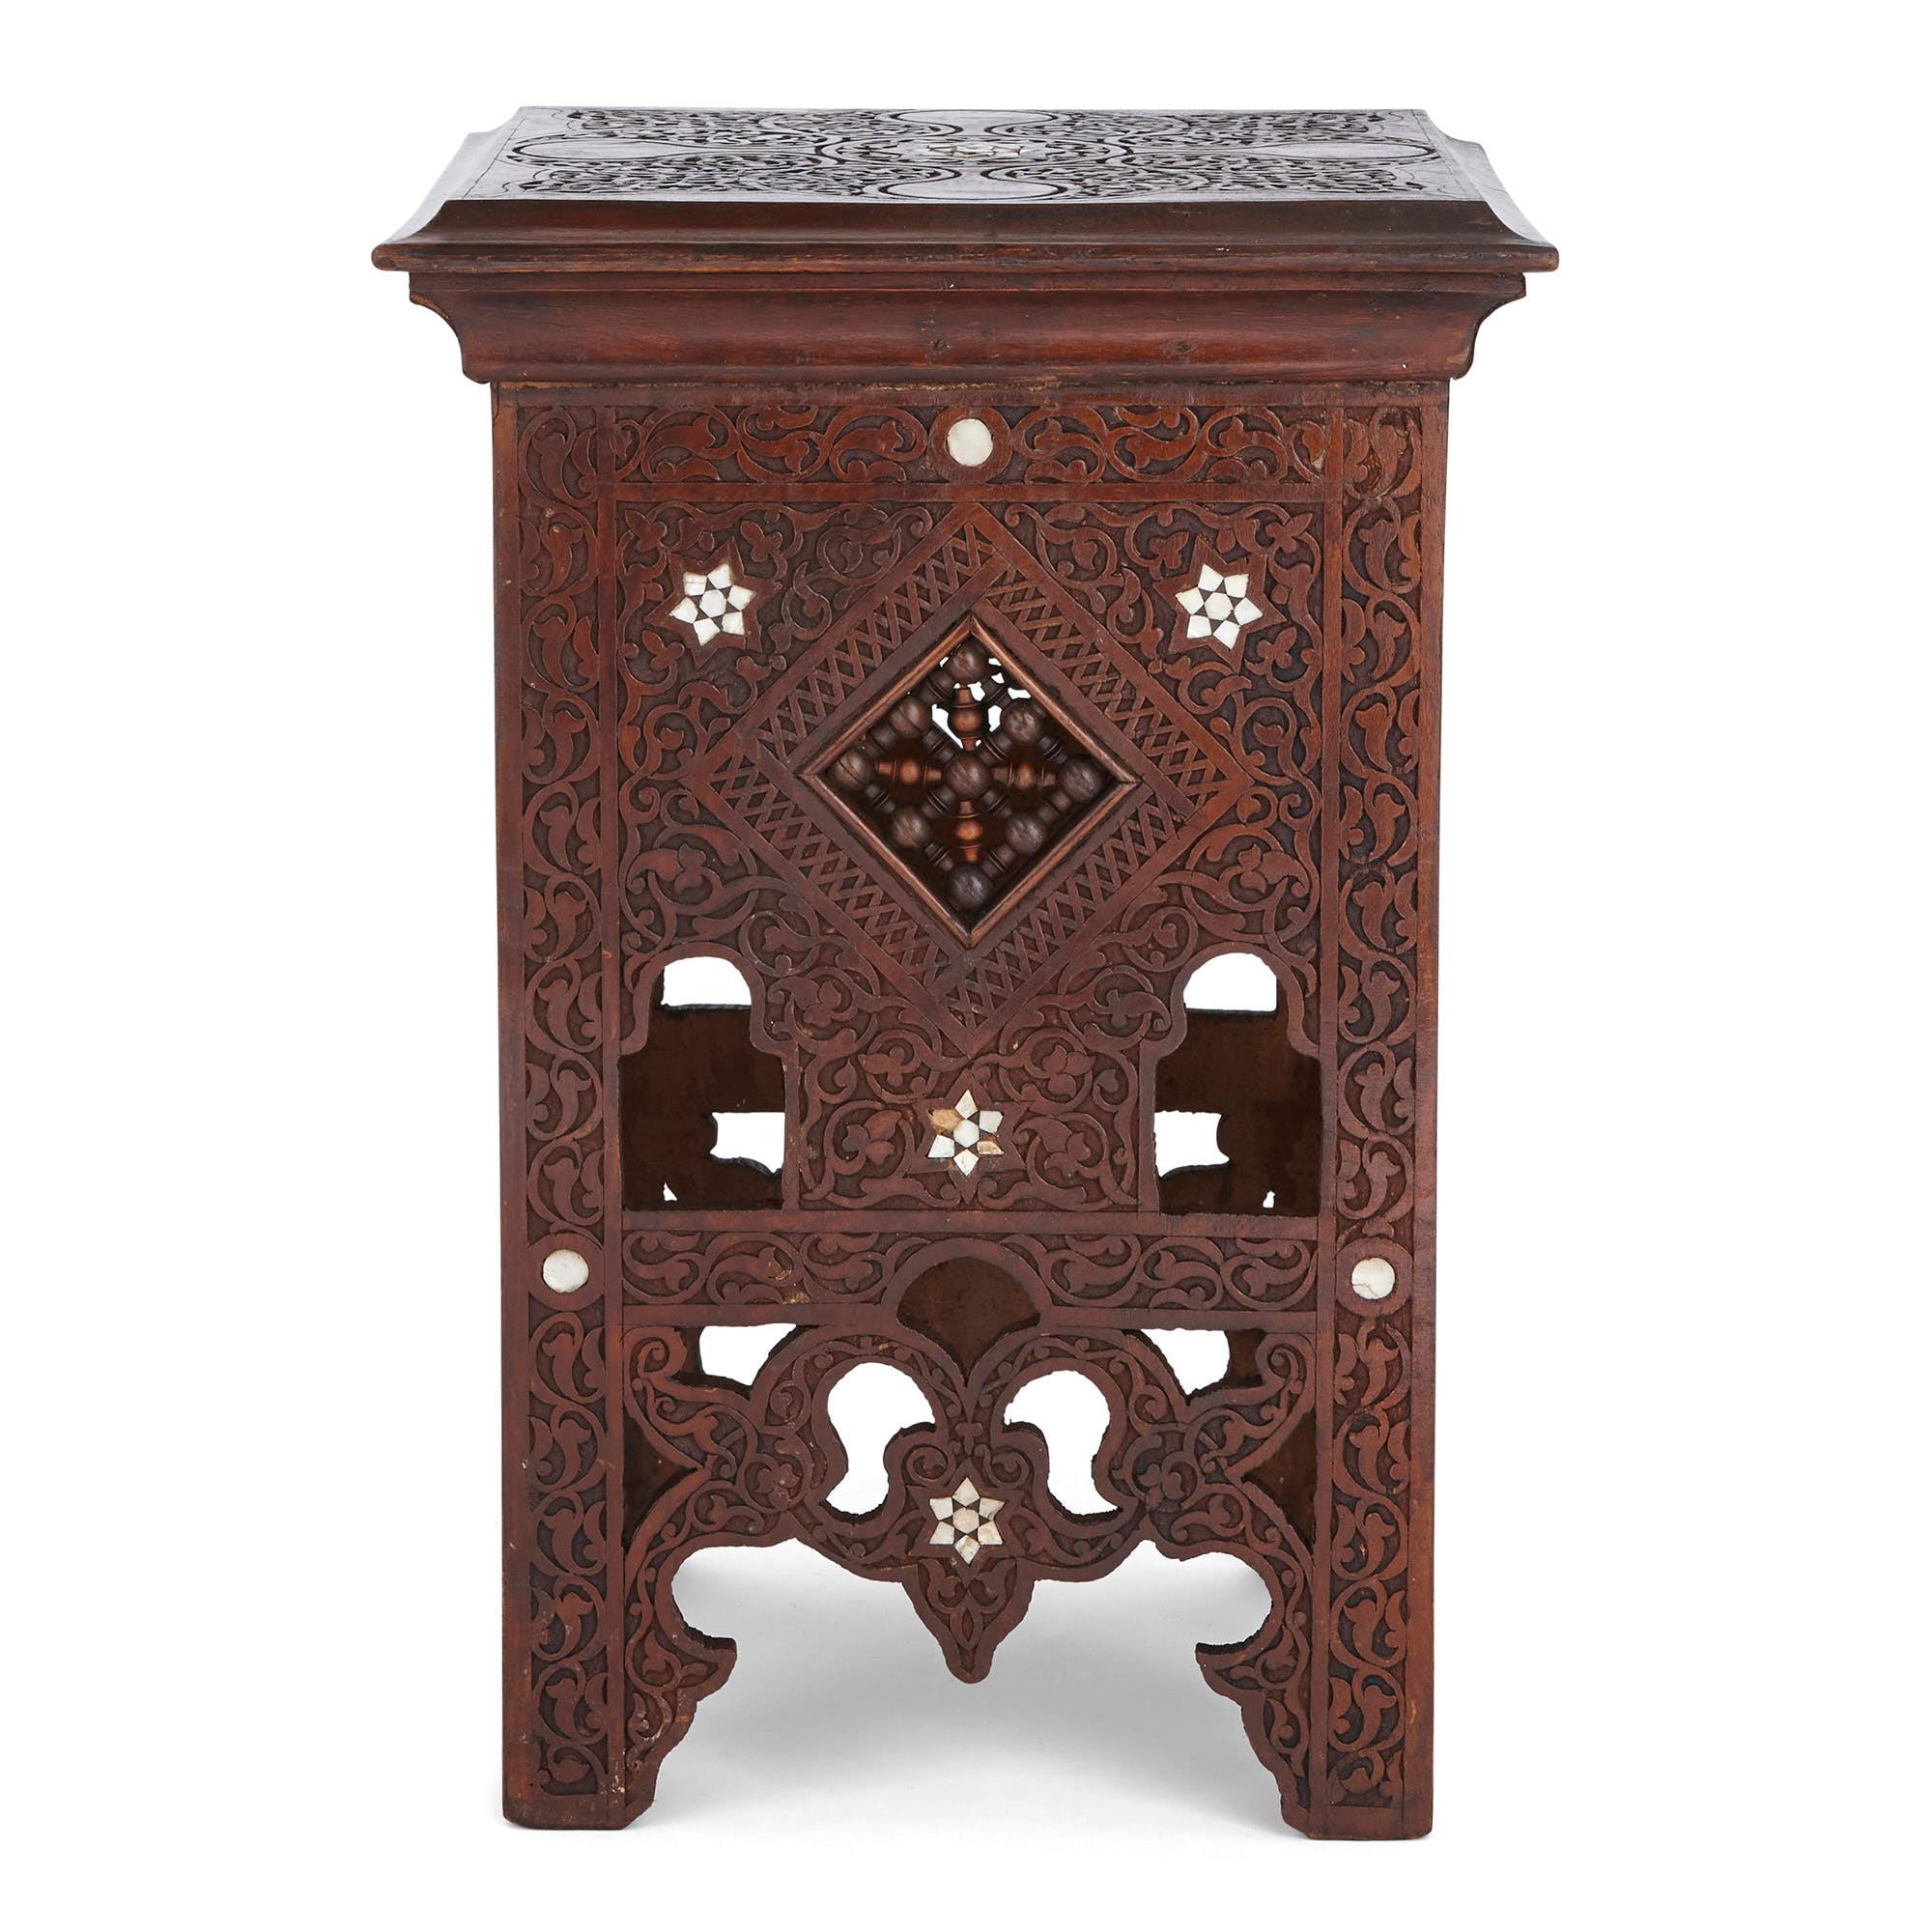 Mother-of-Pearl Moorish Style Mother of Pearl Inlaid Hardwood Three-Piece Furniture Set For Sale